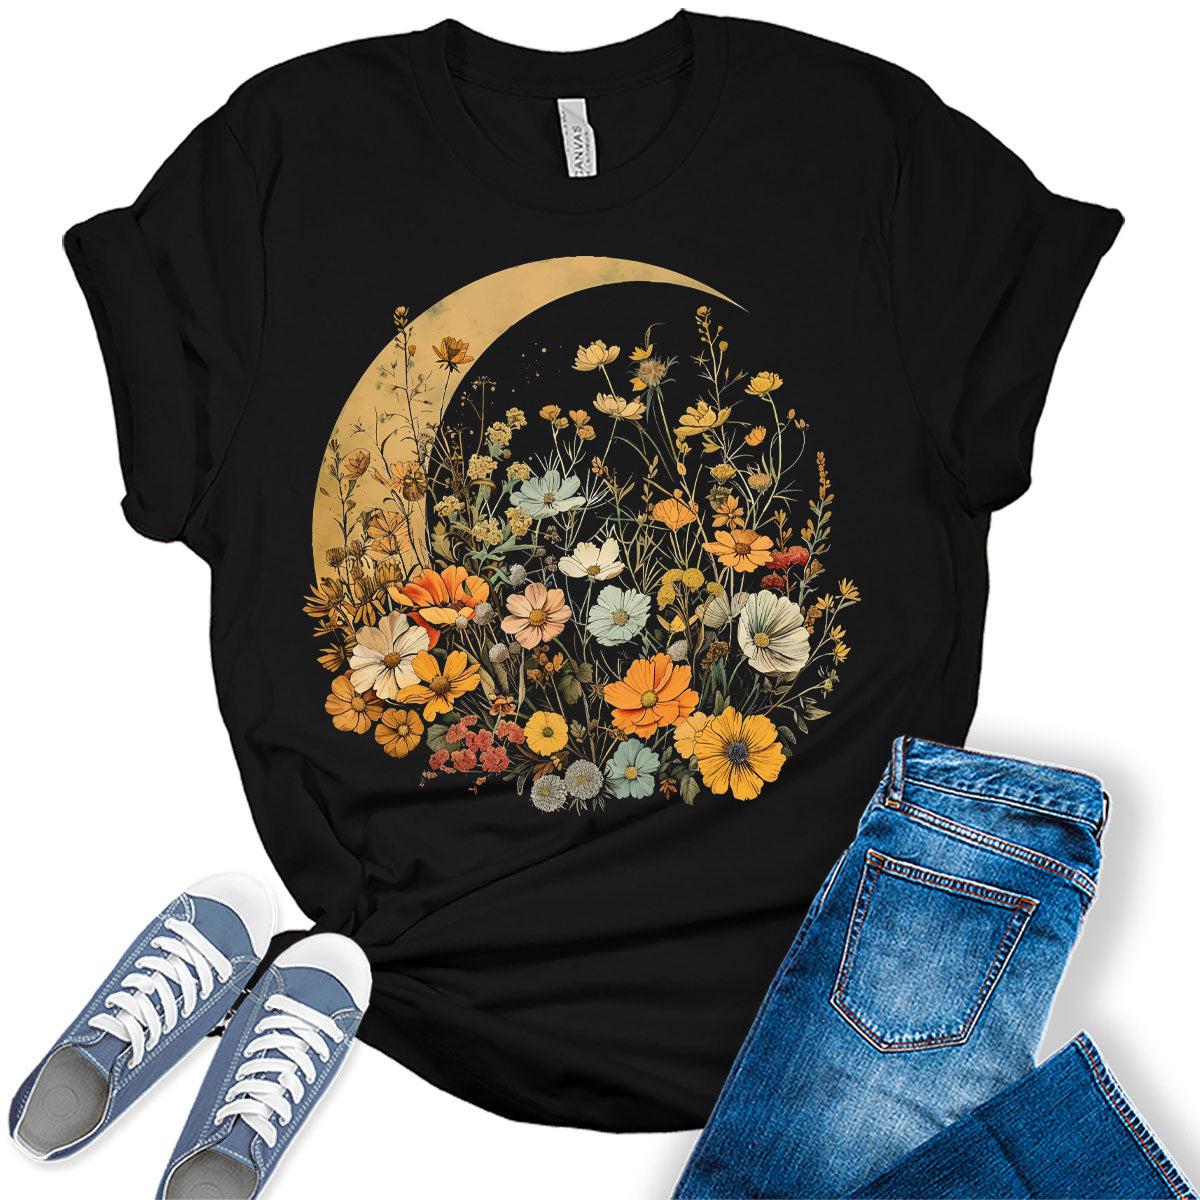 Crescent Moon Shirt Cottagecore Forest Flower Graphic Tees for Women